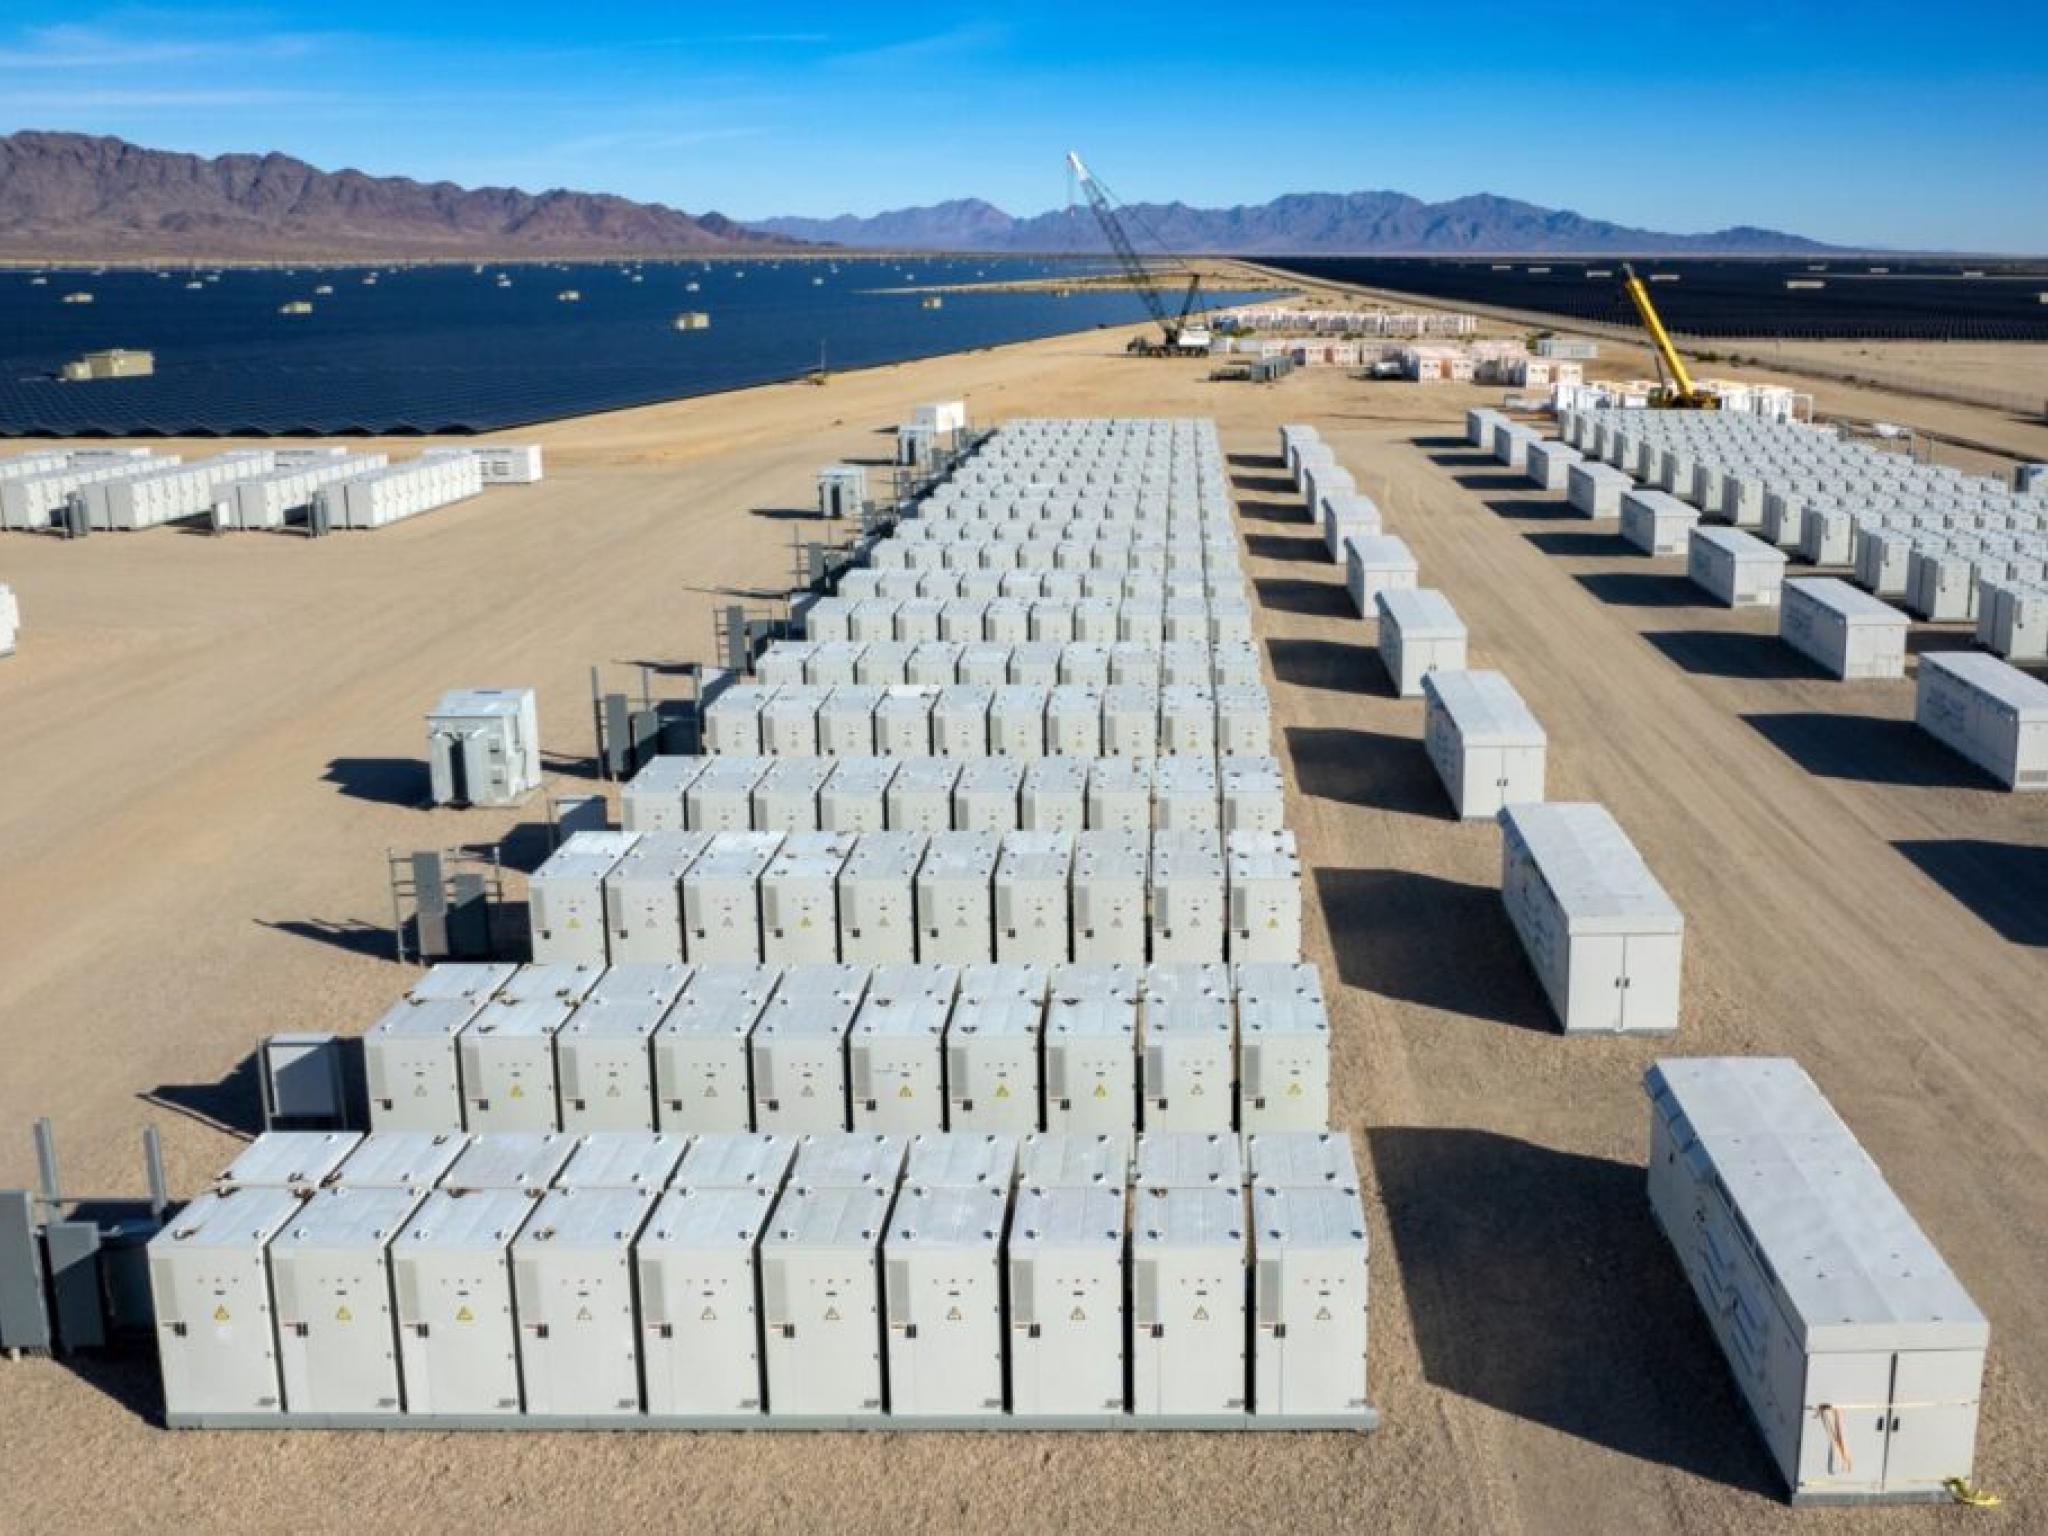  golden-state-goes-green-californias-battery-storage-outshines-gas-renewables-for-first-time-as-tesla-ceo-musk-lauds-major-milestone 